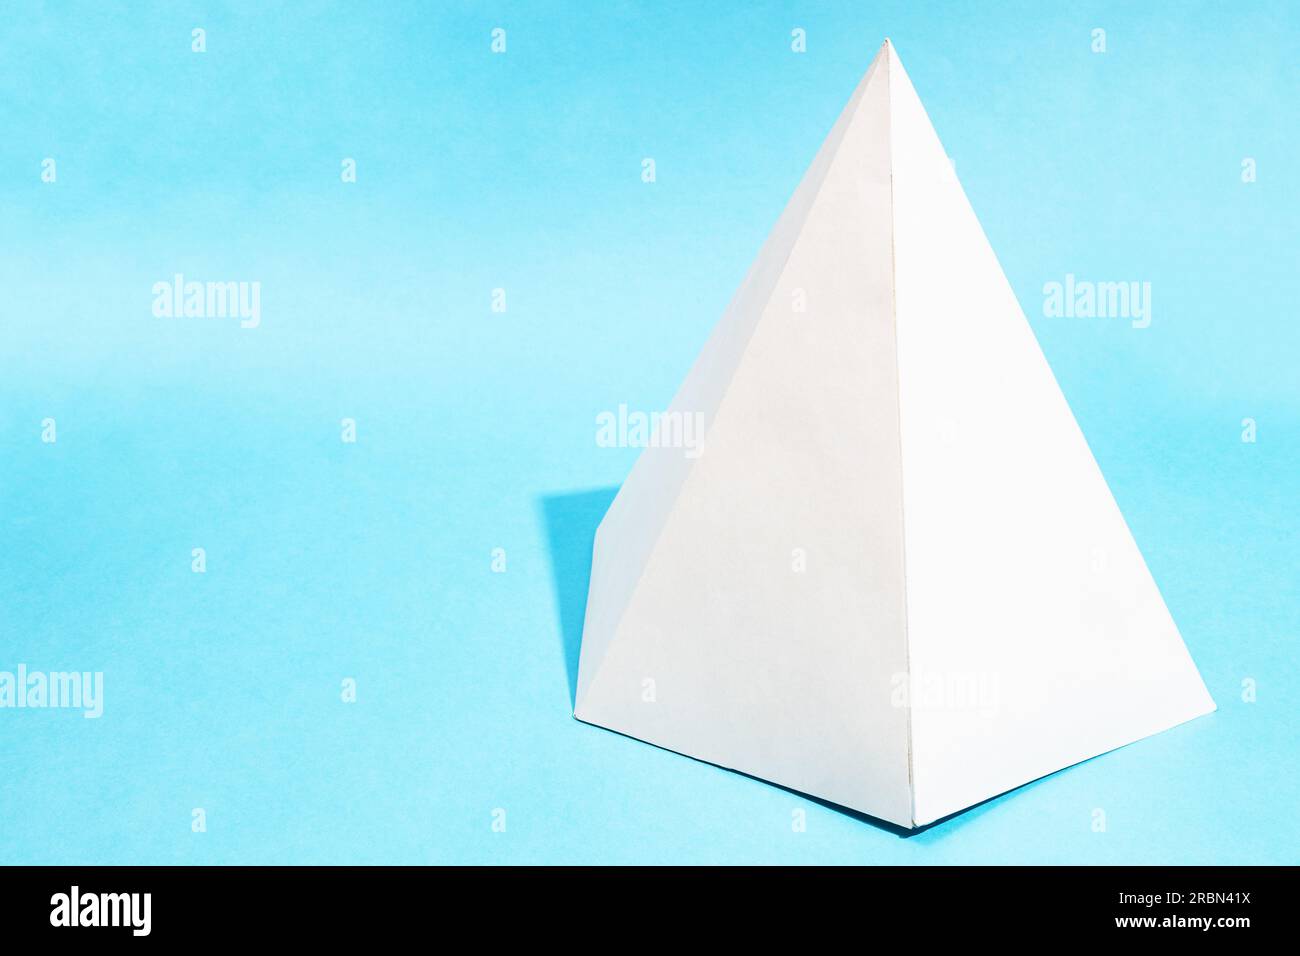 handcrafted paper hexagonal pyramid on turquoise blue background with copyspace Stock Photo